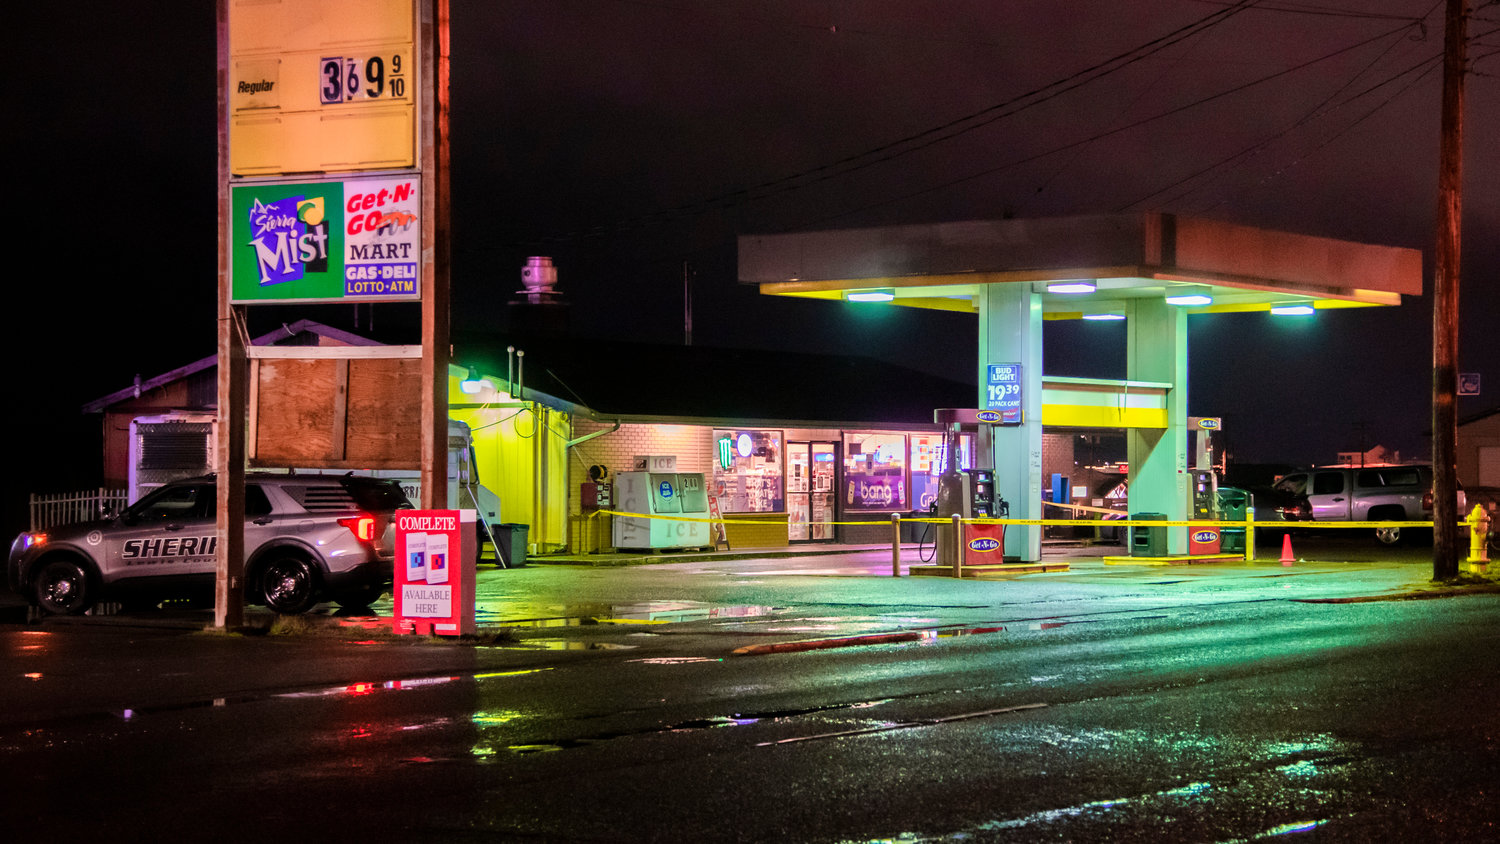 A Lewis County Sheriff is seen parked next to the Get-N-Go Mart in Chehalis where police tape surrounds pumps near the entrance of the building Monday night.